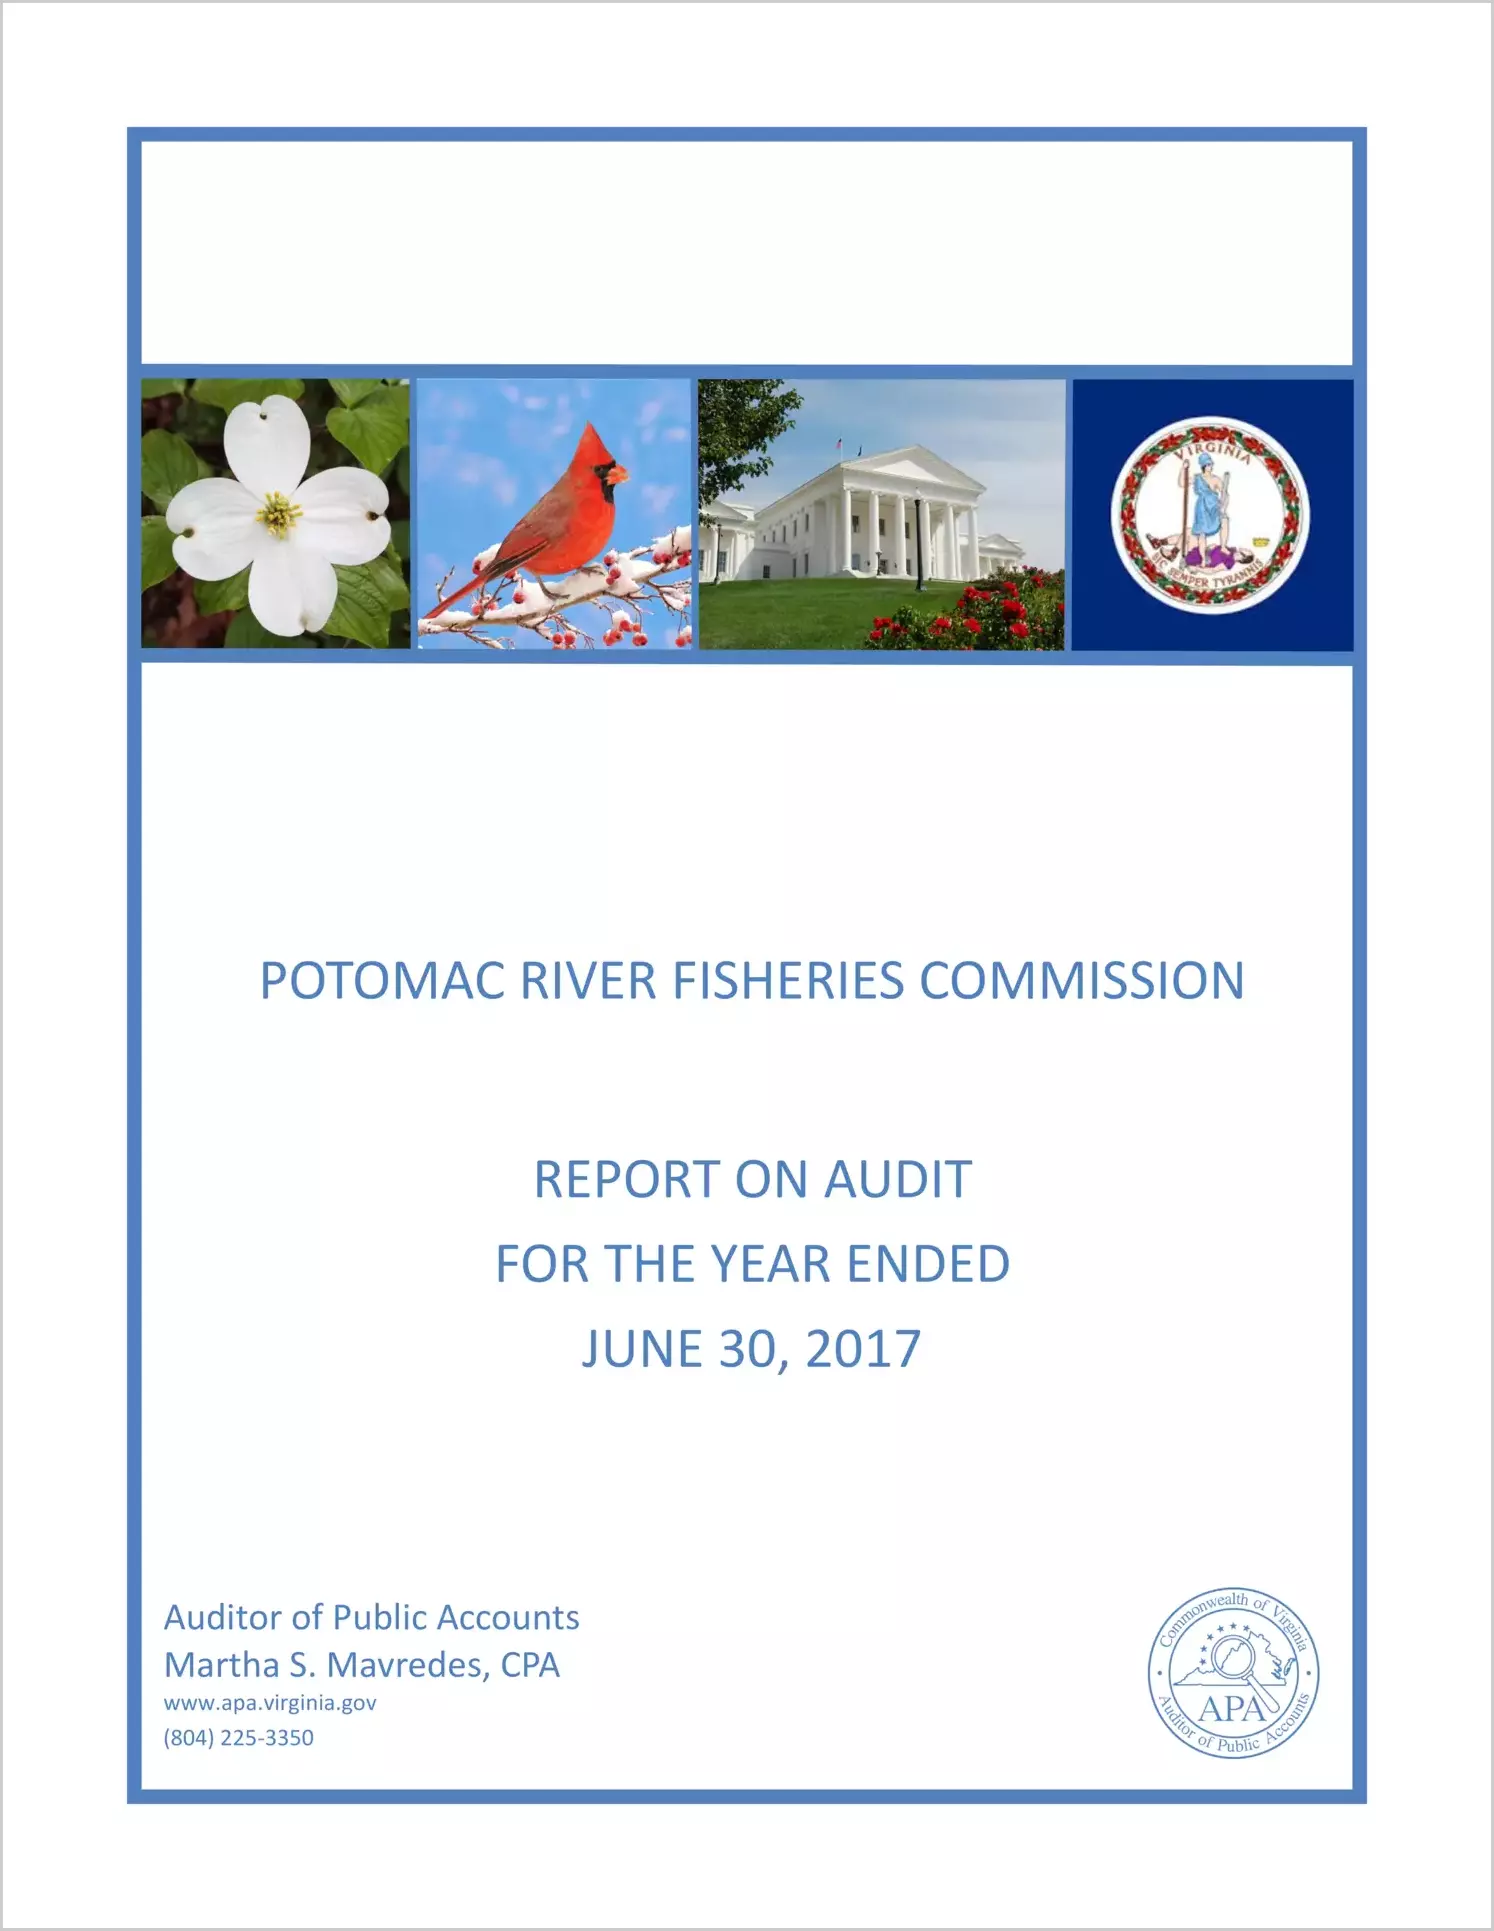 Potomac River Fisheries Commission for the year ended June 30, 2017